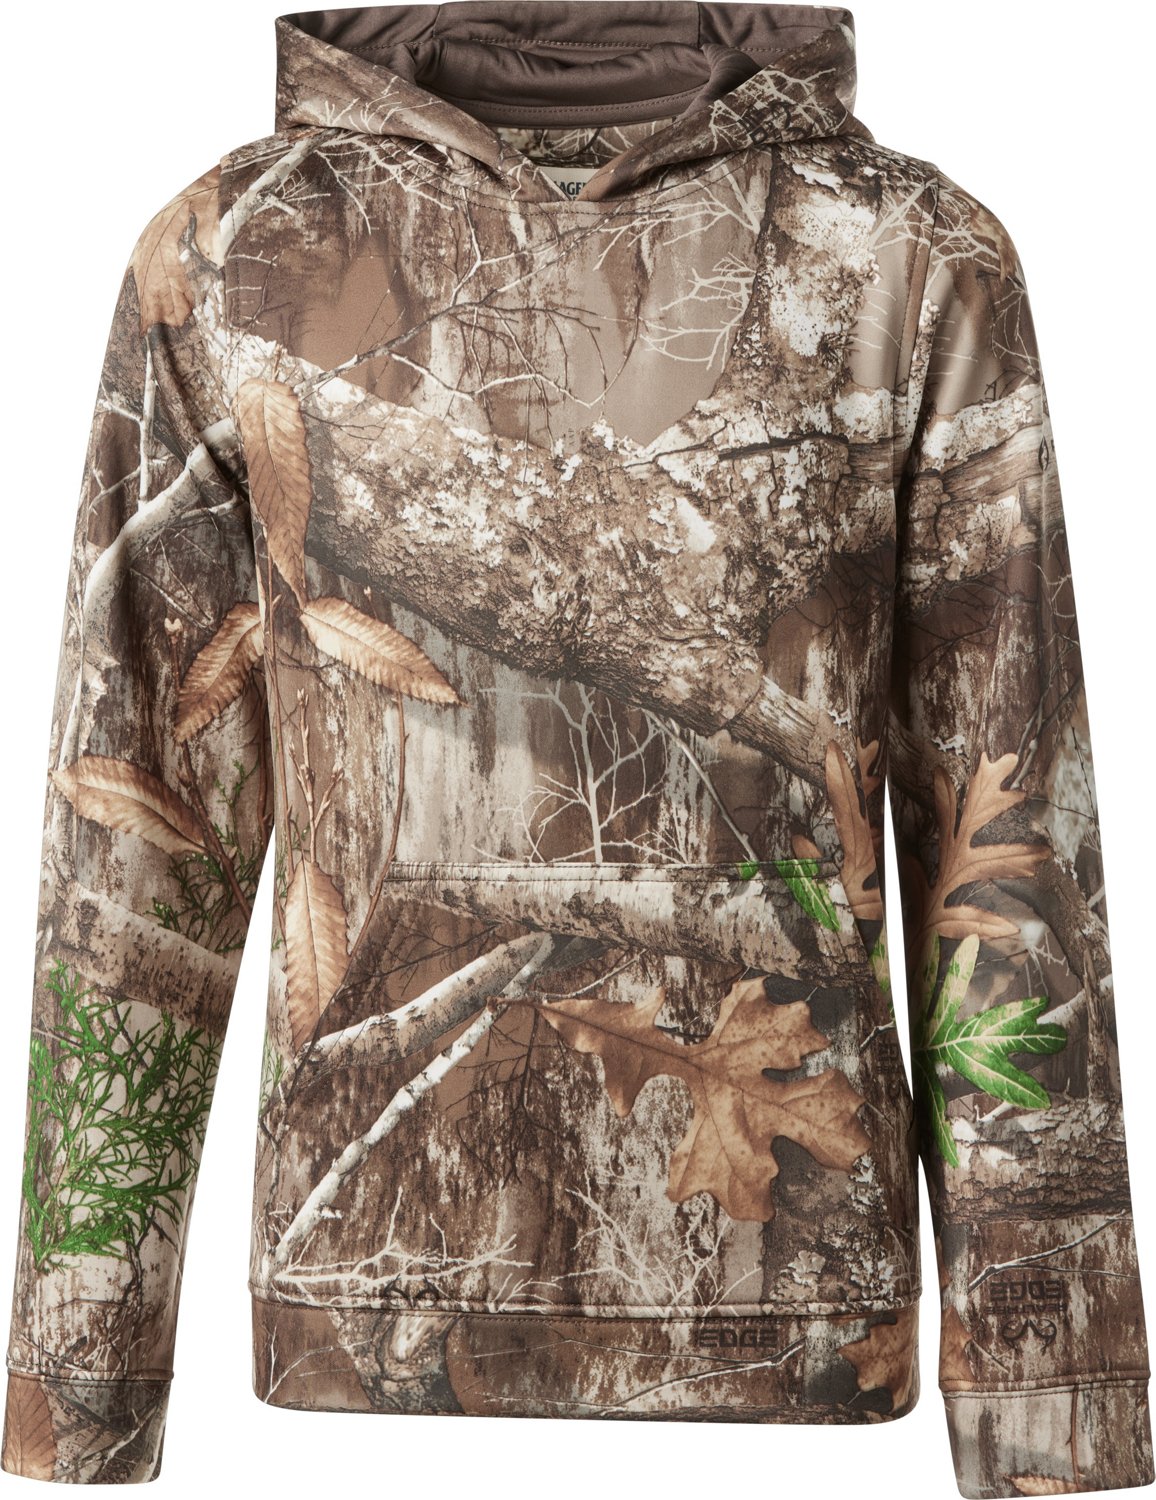 St. Louis Cardinals MLB Special Camo Realtree Hunting Hoodie T